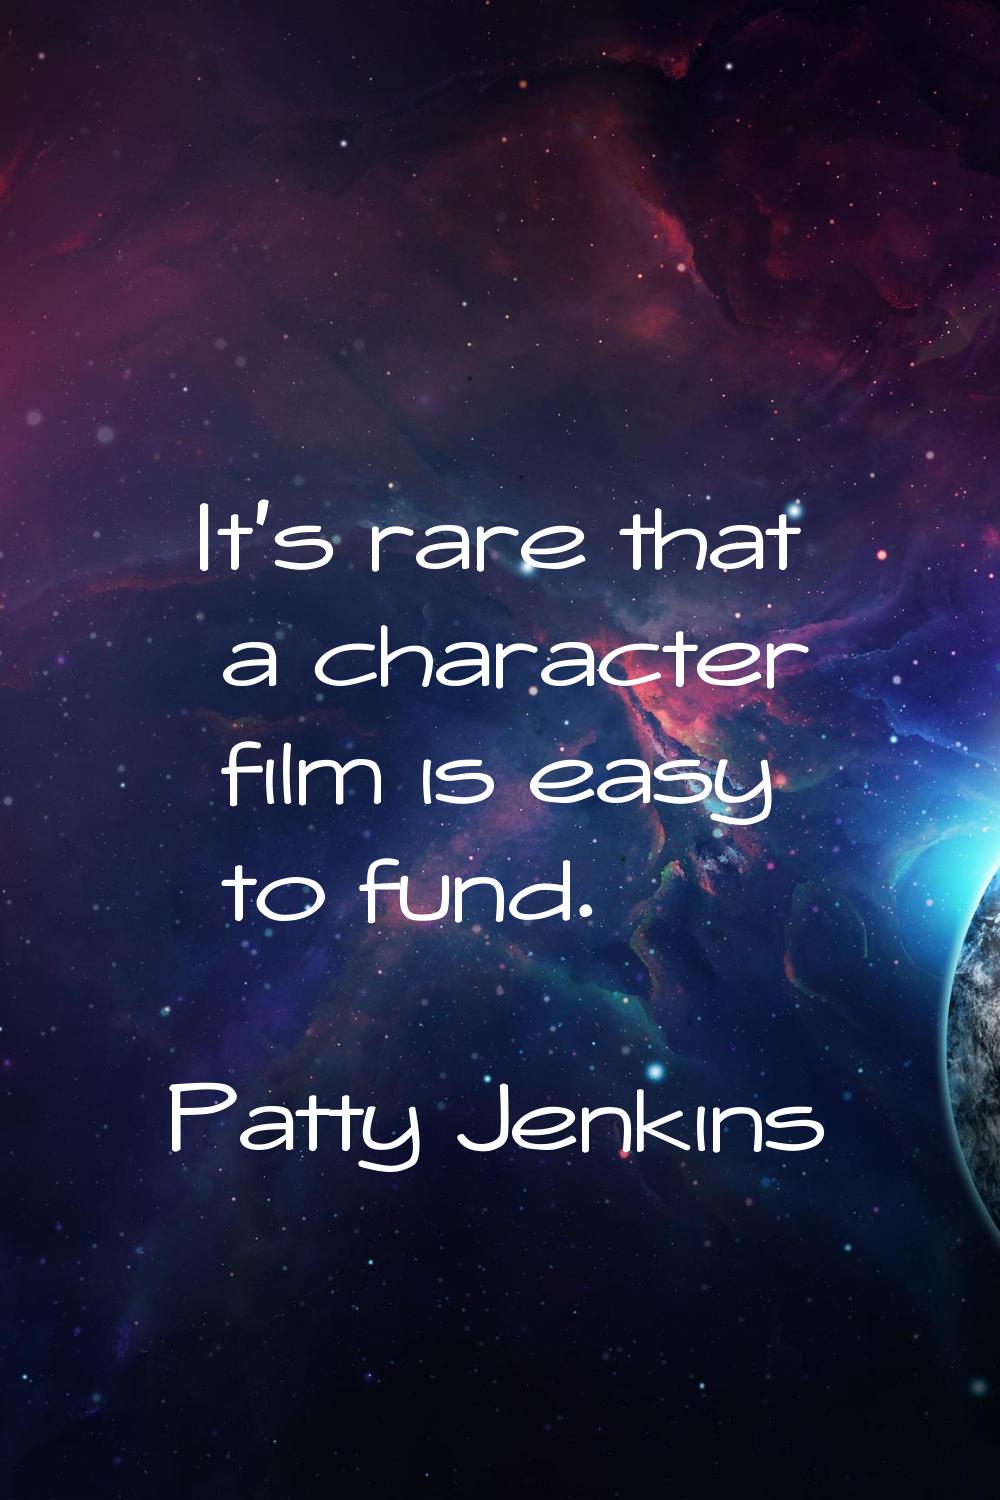 It's rare that a character film is easy to fund.